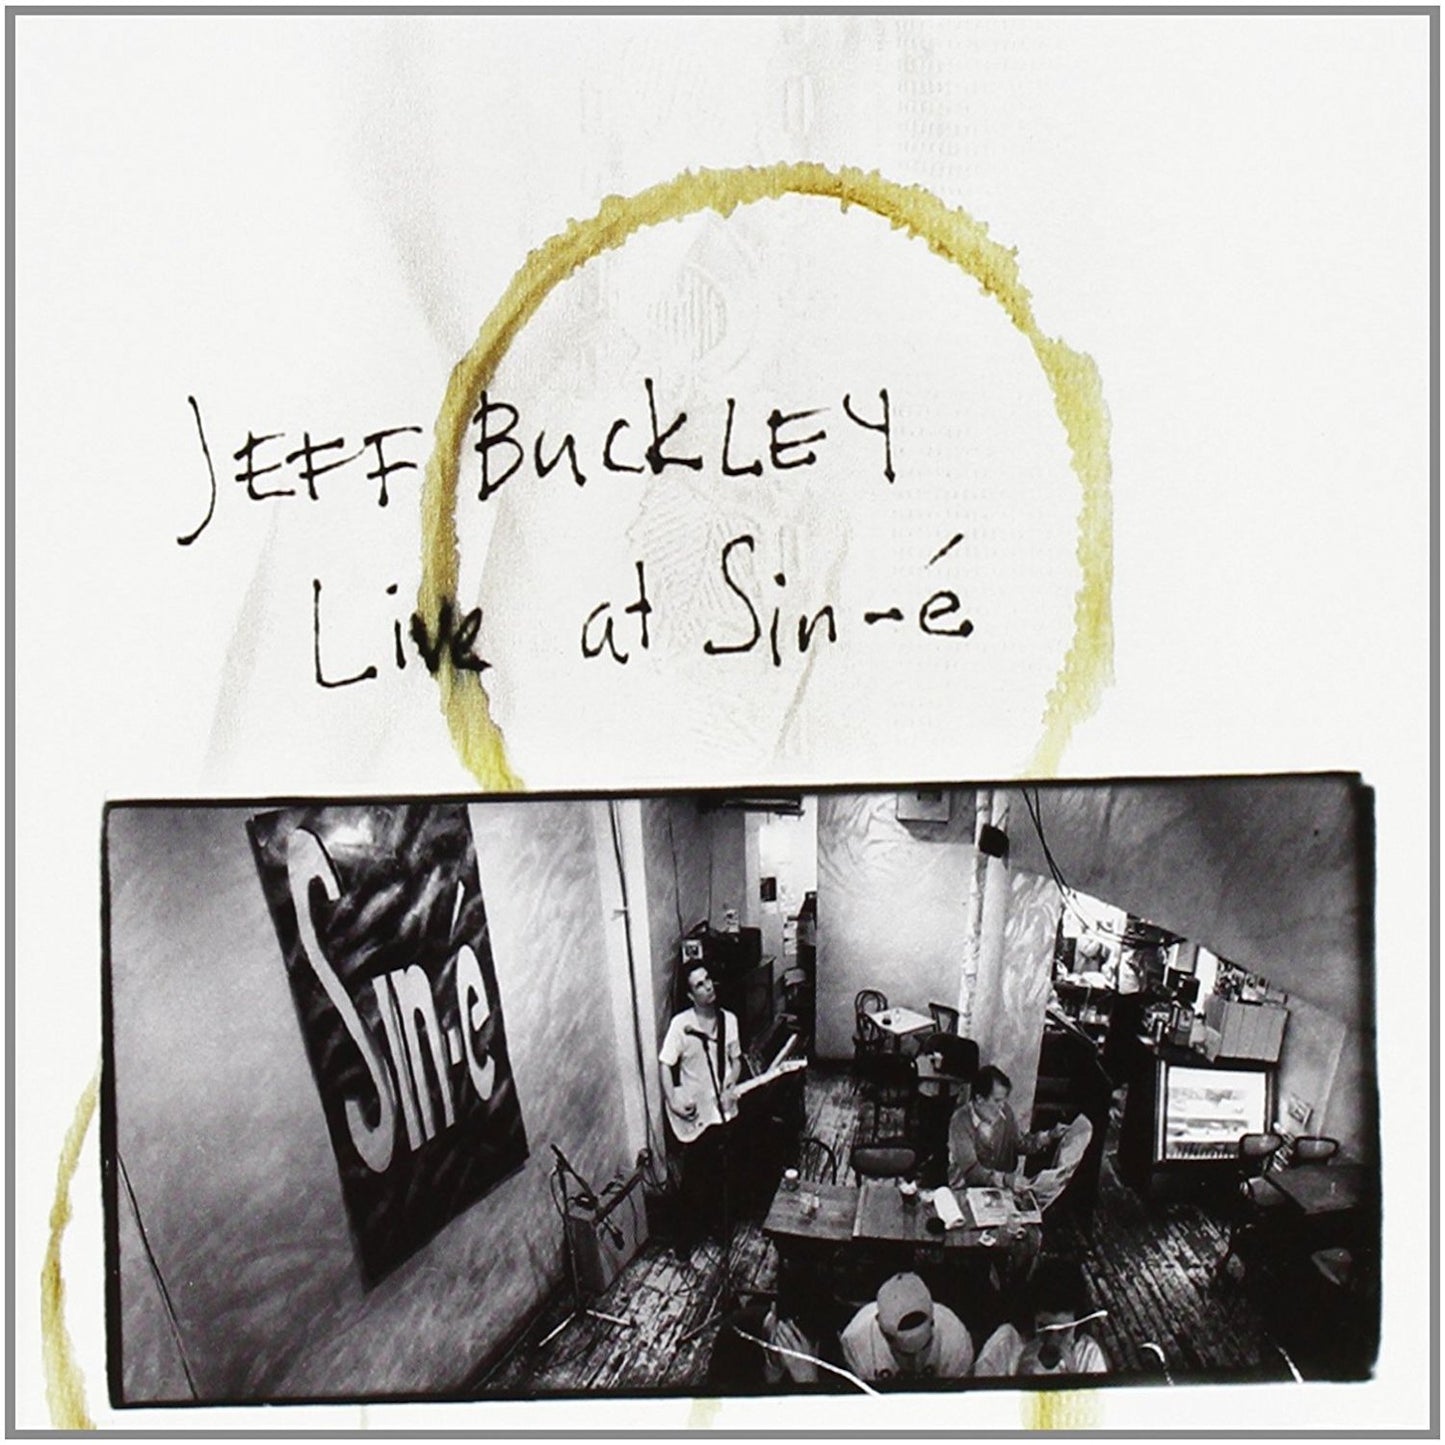 Buckley, Jeff - Live at Sin-e